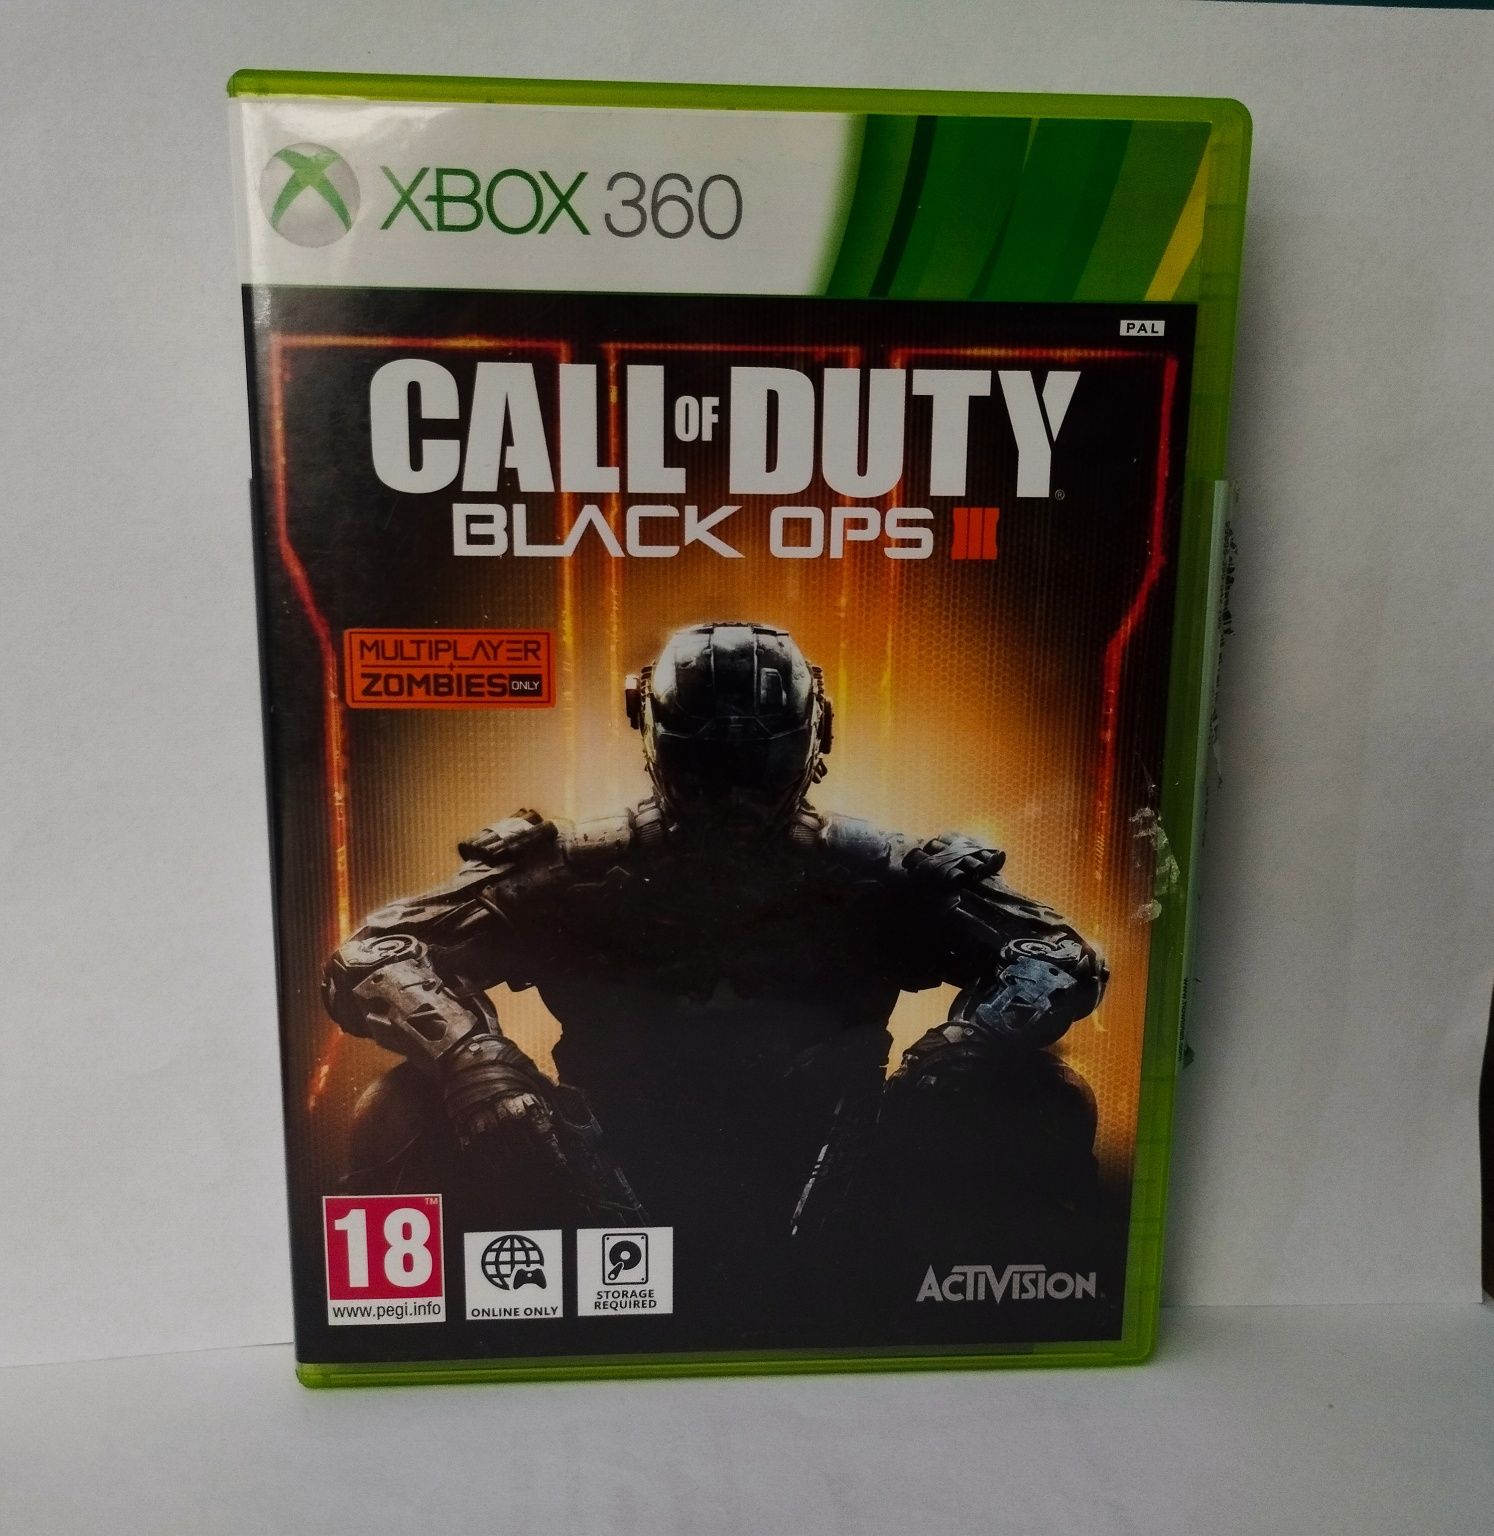 Call of duty Black ops 3